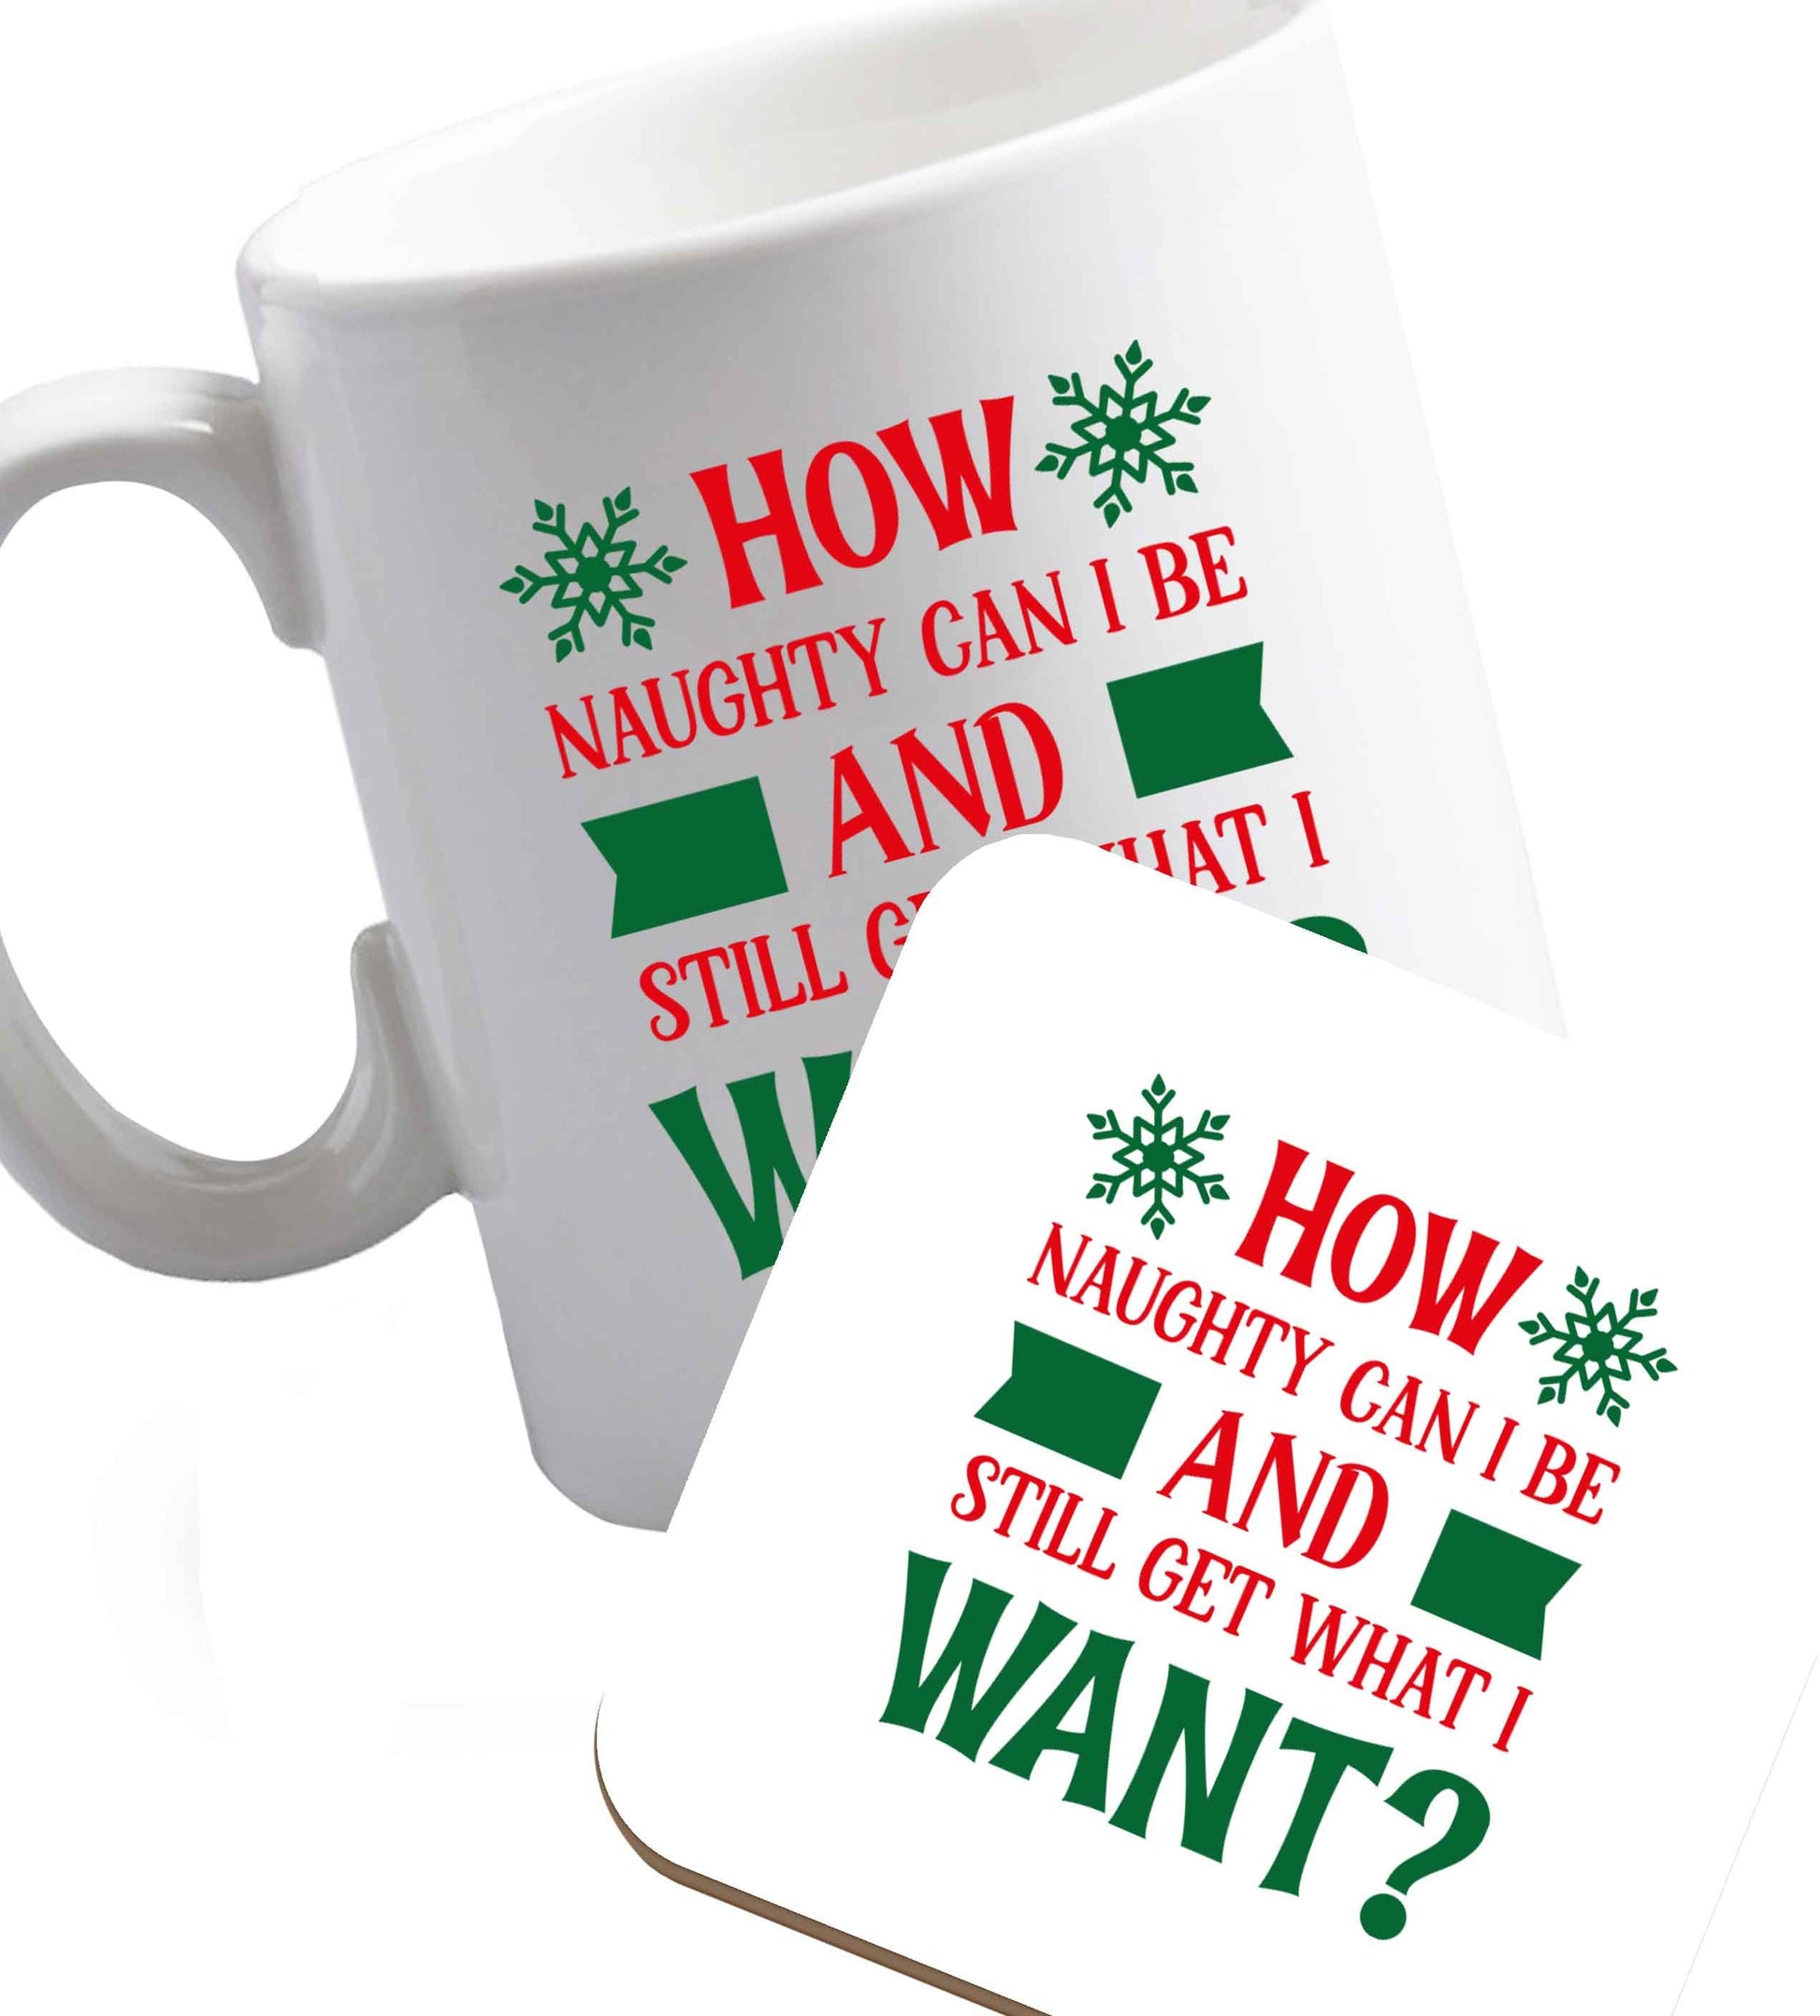 10 oz How naughty can I be and still get what I want? ceramic mug and coaster set right handed